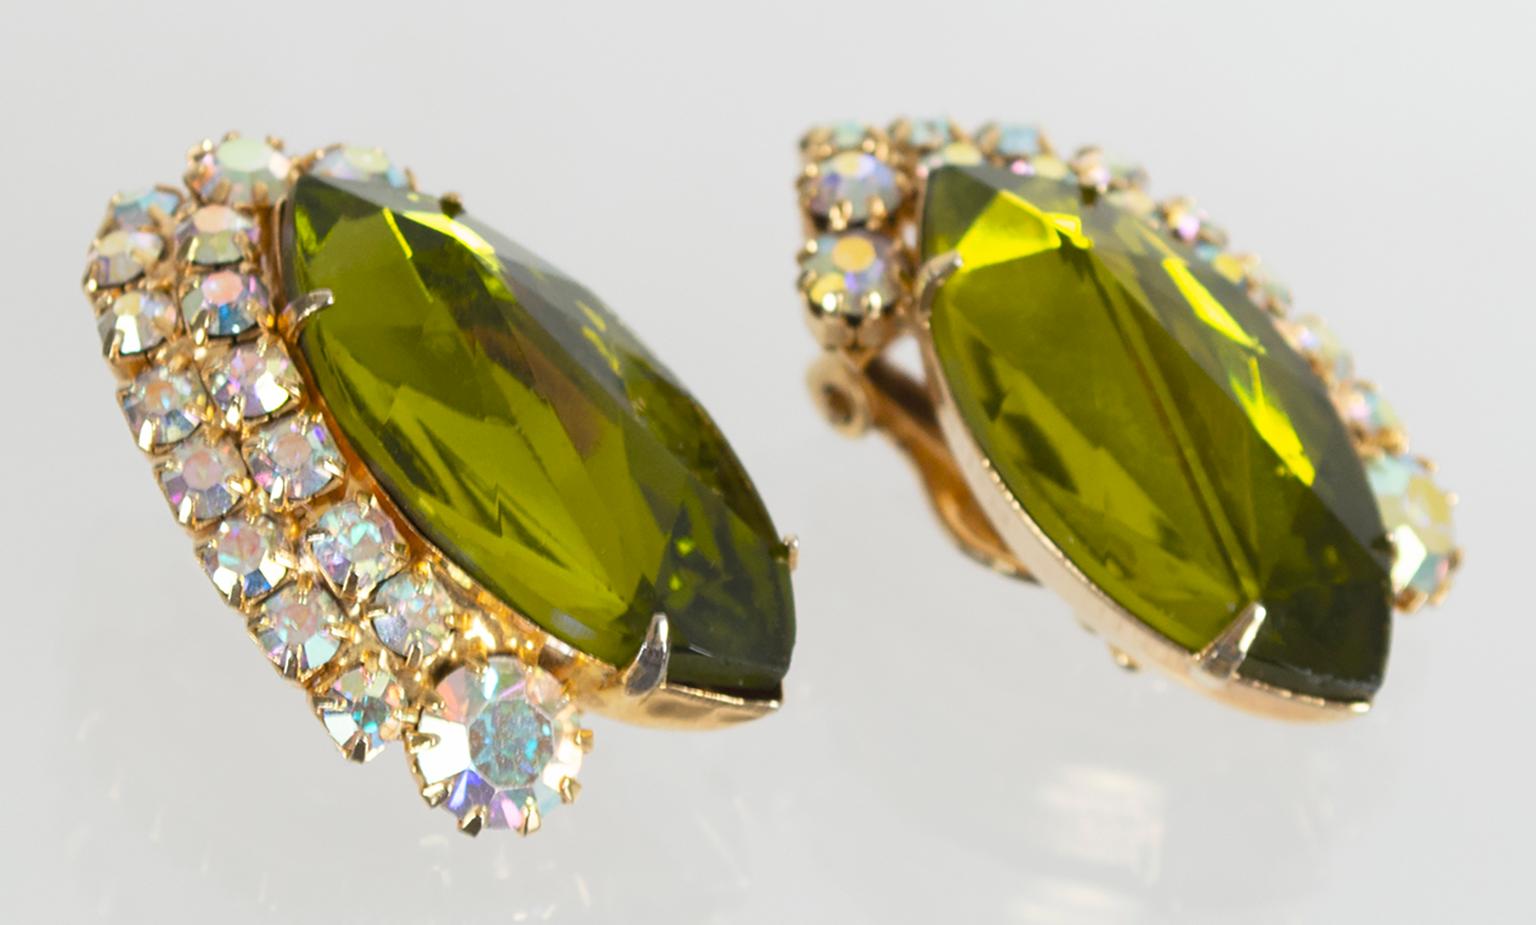 Their large size affords these mesmerizing earrings more facets than typical marquis cuts, giving them a fiery brilliance that perfectly compliments their unique olive tourmaline shade. Though they are costume, their exquisite cut and color make